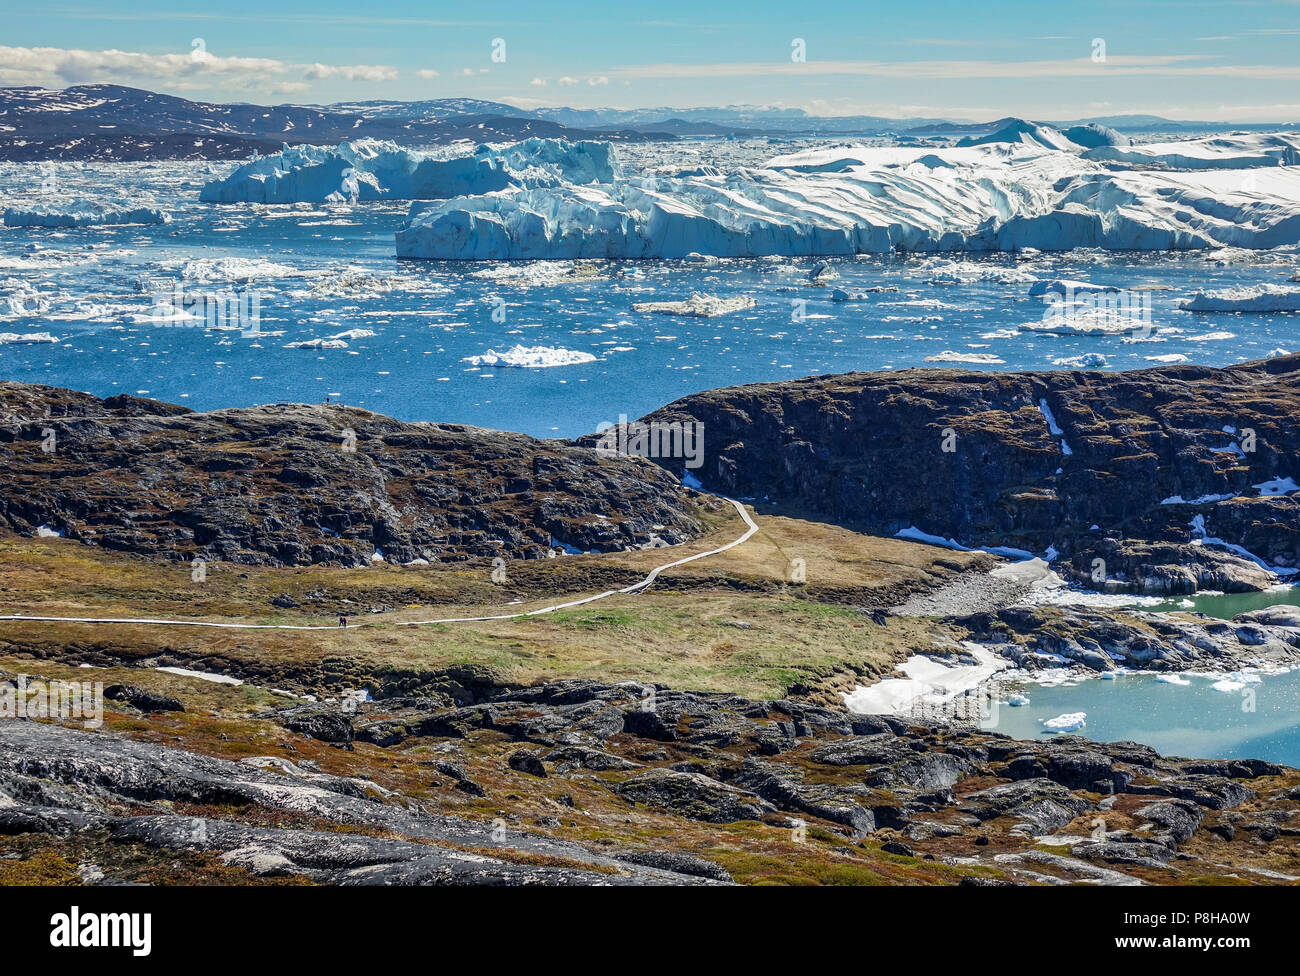 24.06.2018, Gronland, Denmark: Huge icebergs drifting in the sea in front of the coastal town of Ilulissat in western Greenland. The city is located on the Ilulissat Icefjord, which is known for its particularly large icebergs in Disko Bay. Photo: Patrick Pleul/dpa-Zentralbild/ZB | usage worldwide Stock Photo